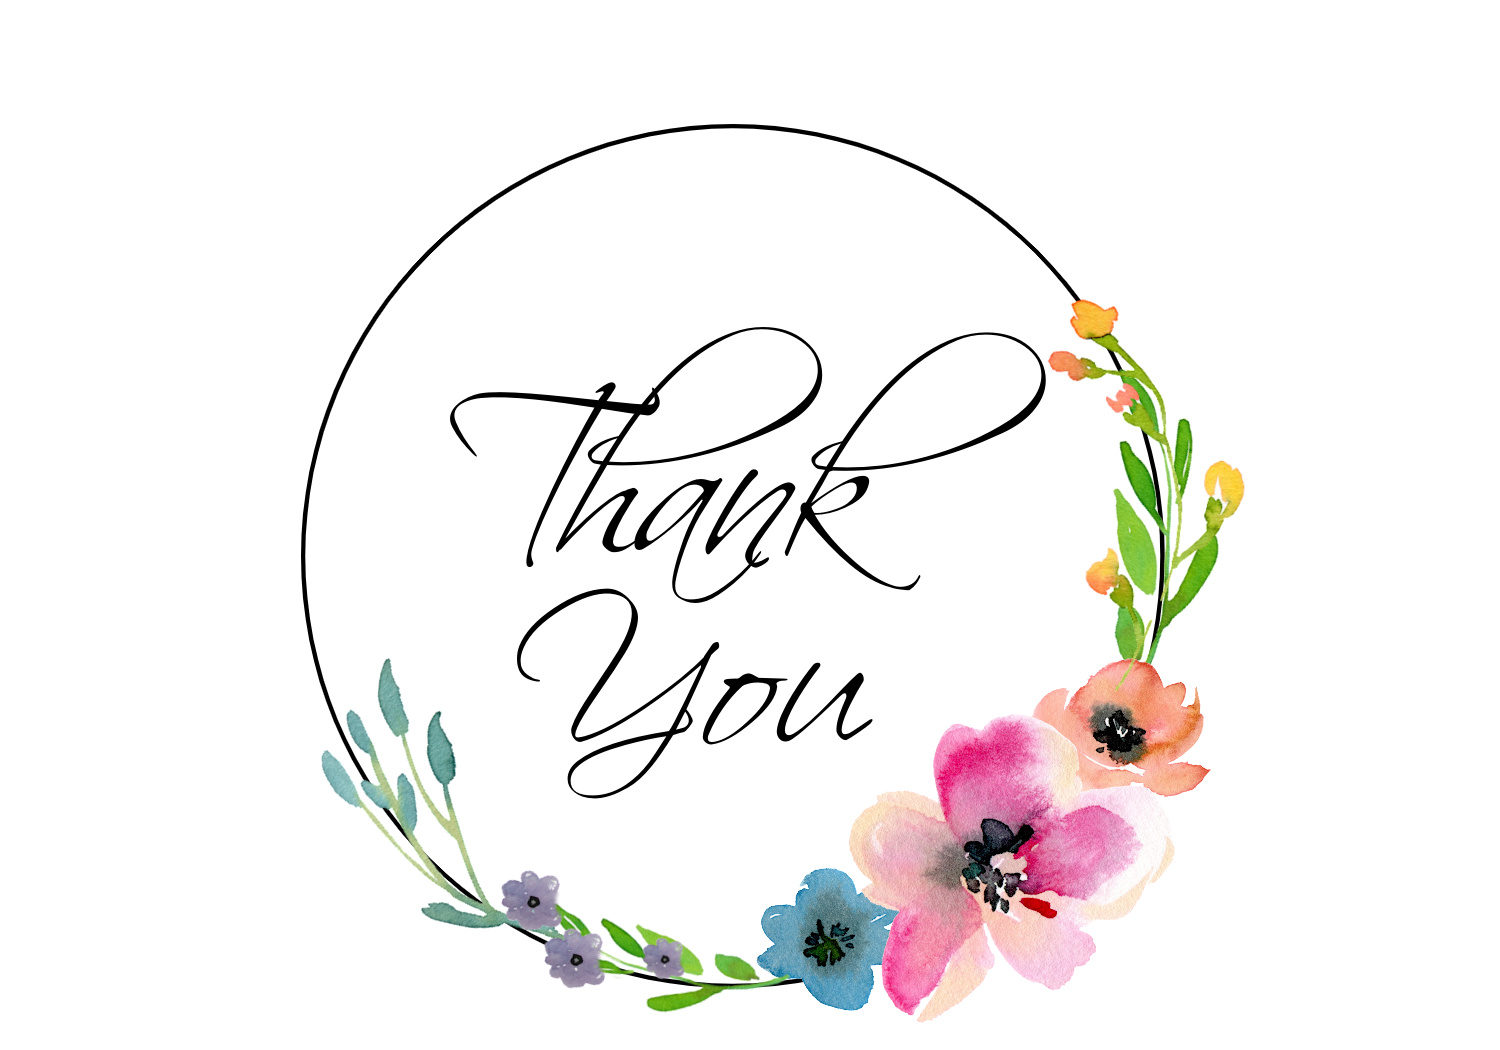 Thank you card in a color floral wreath.